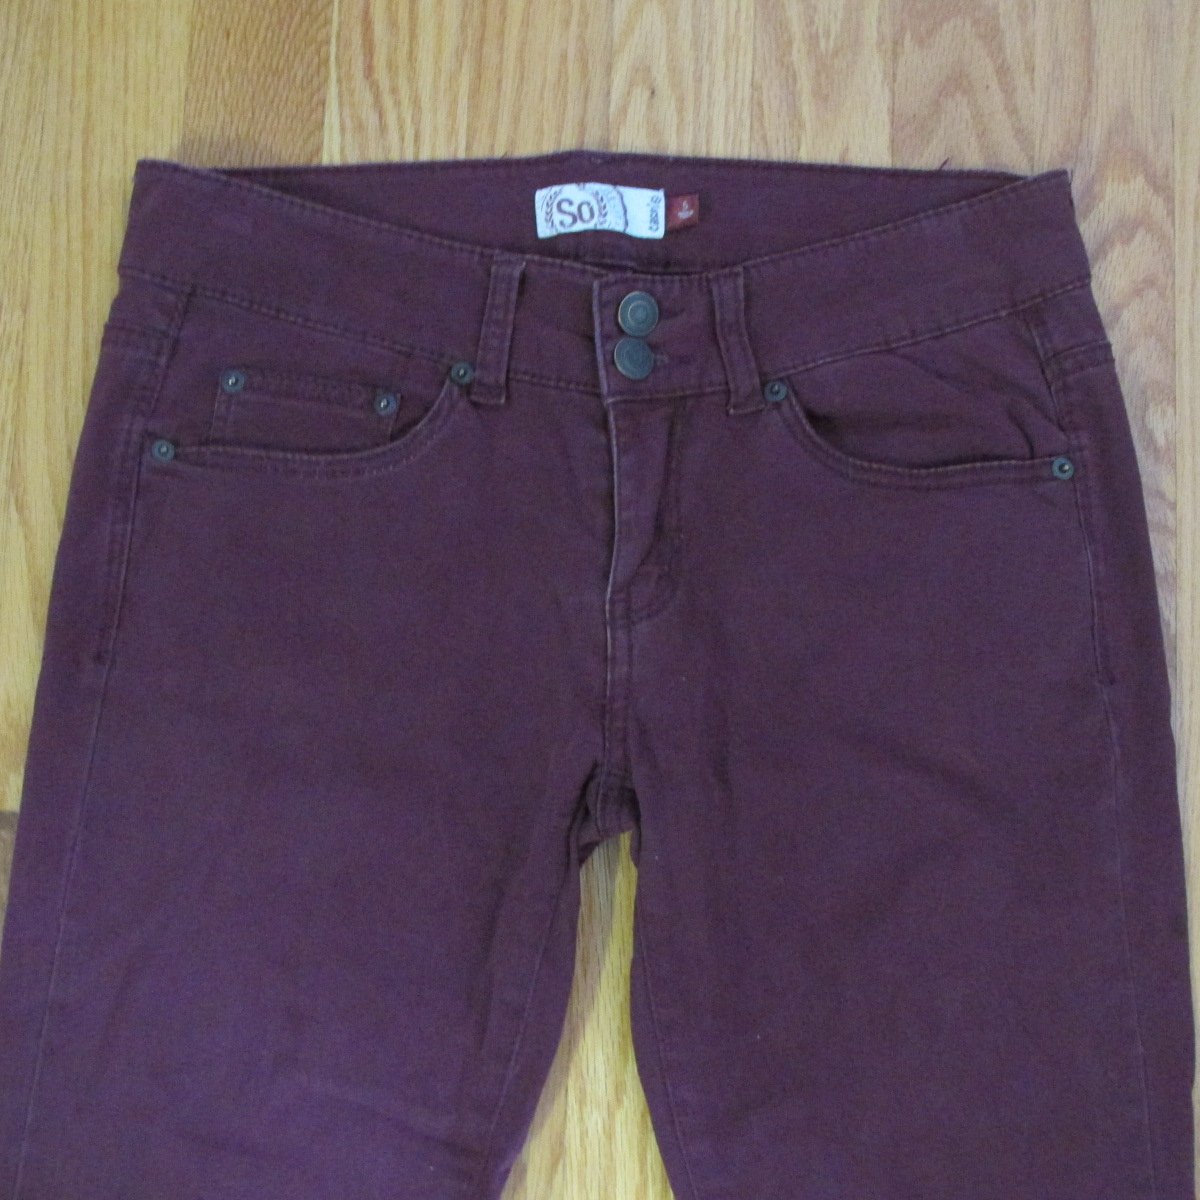 SO WOMEN'S JUNIOR'S SIZE 5 JEANS CRANBERRY STRETCH MID RISE SKINNY LEG